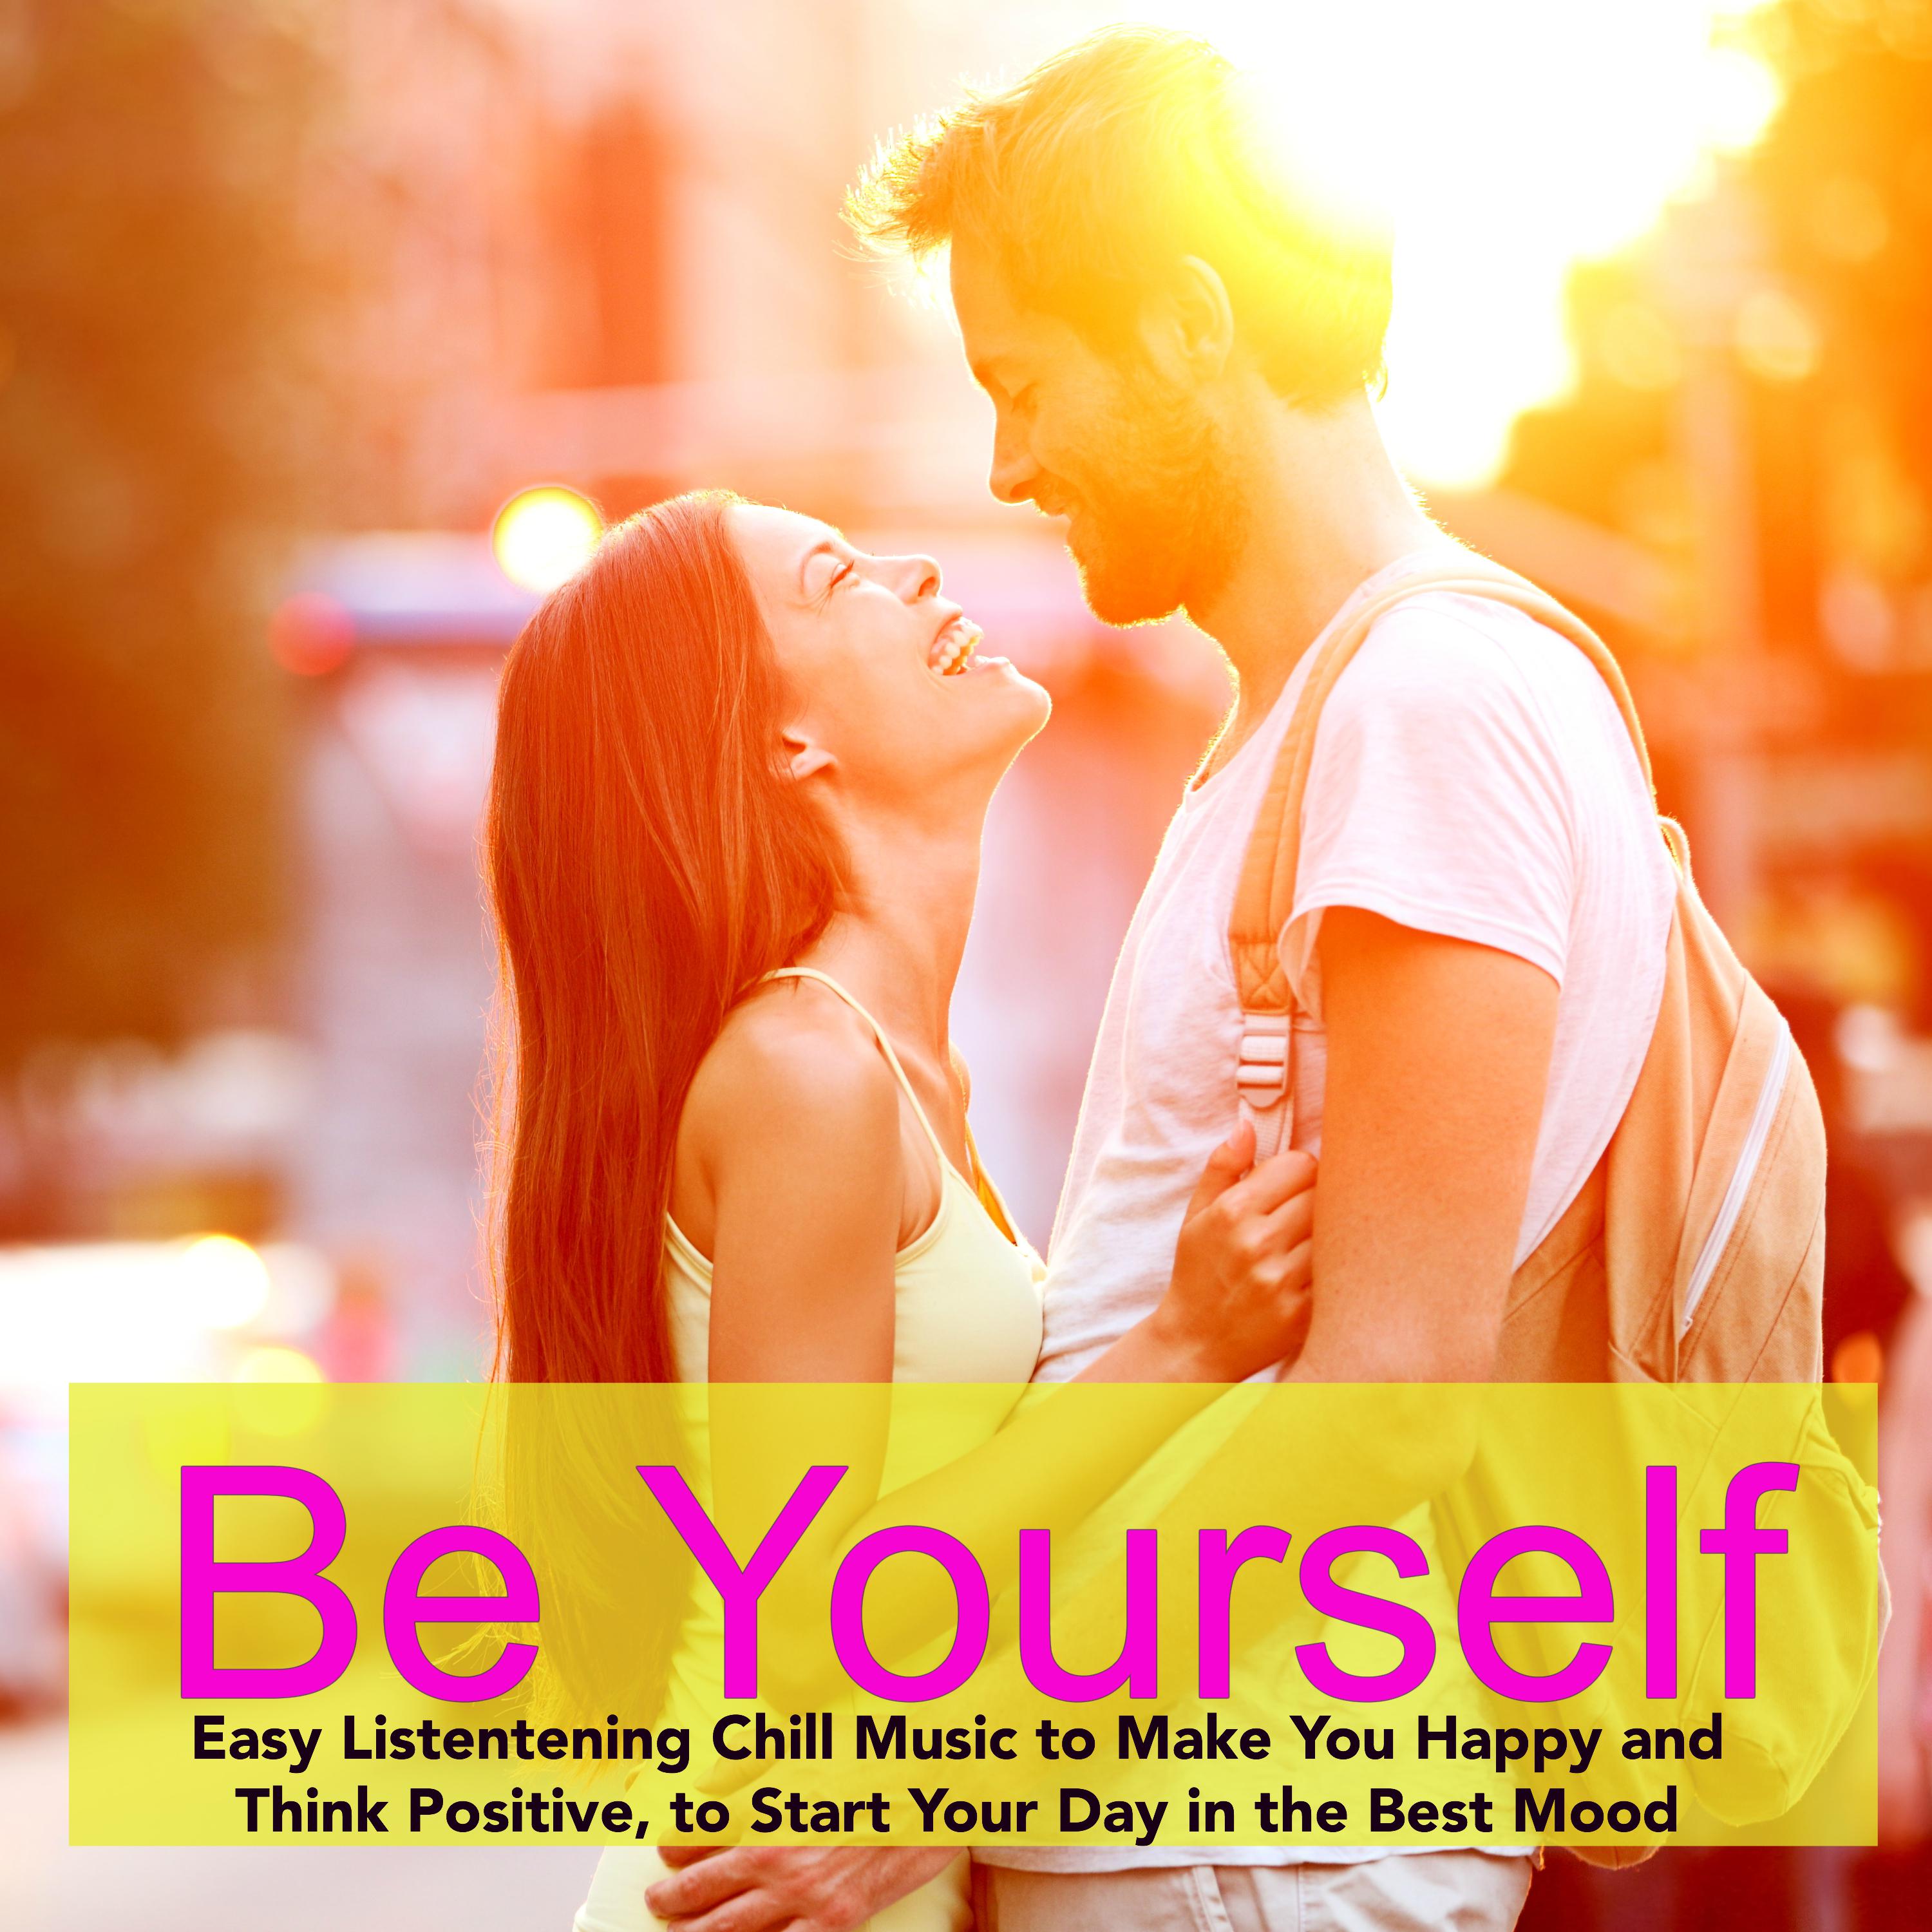 Be Yourself  Easy Listentening Music to Make You Happy and Think Positive, to Start Your Day in the Best Mood